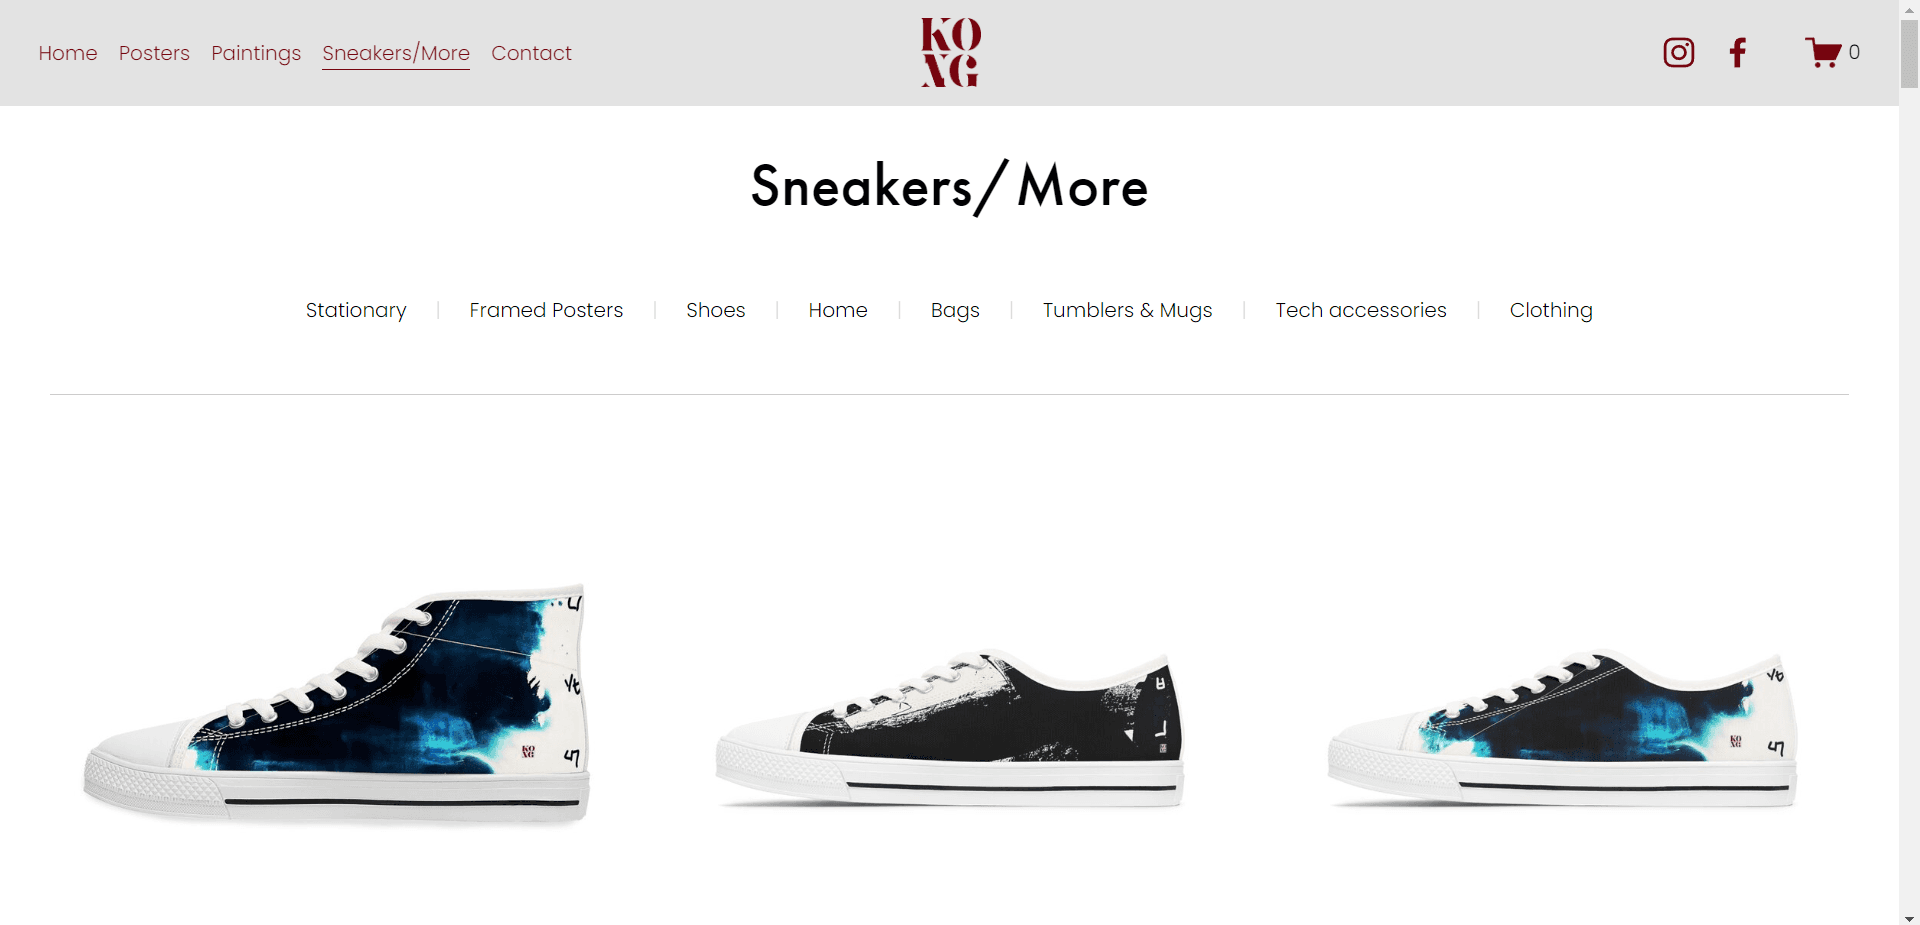 Merchandise page showcasing styled sneakers